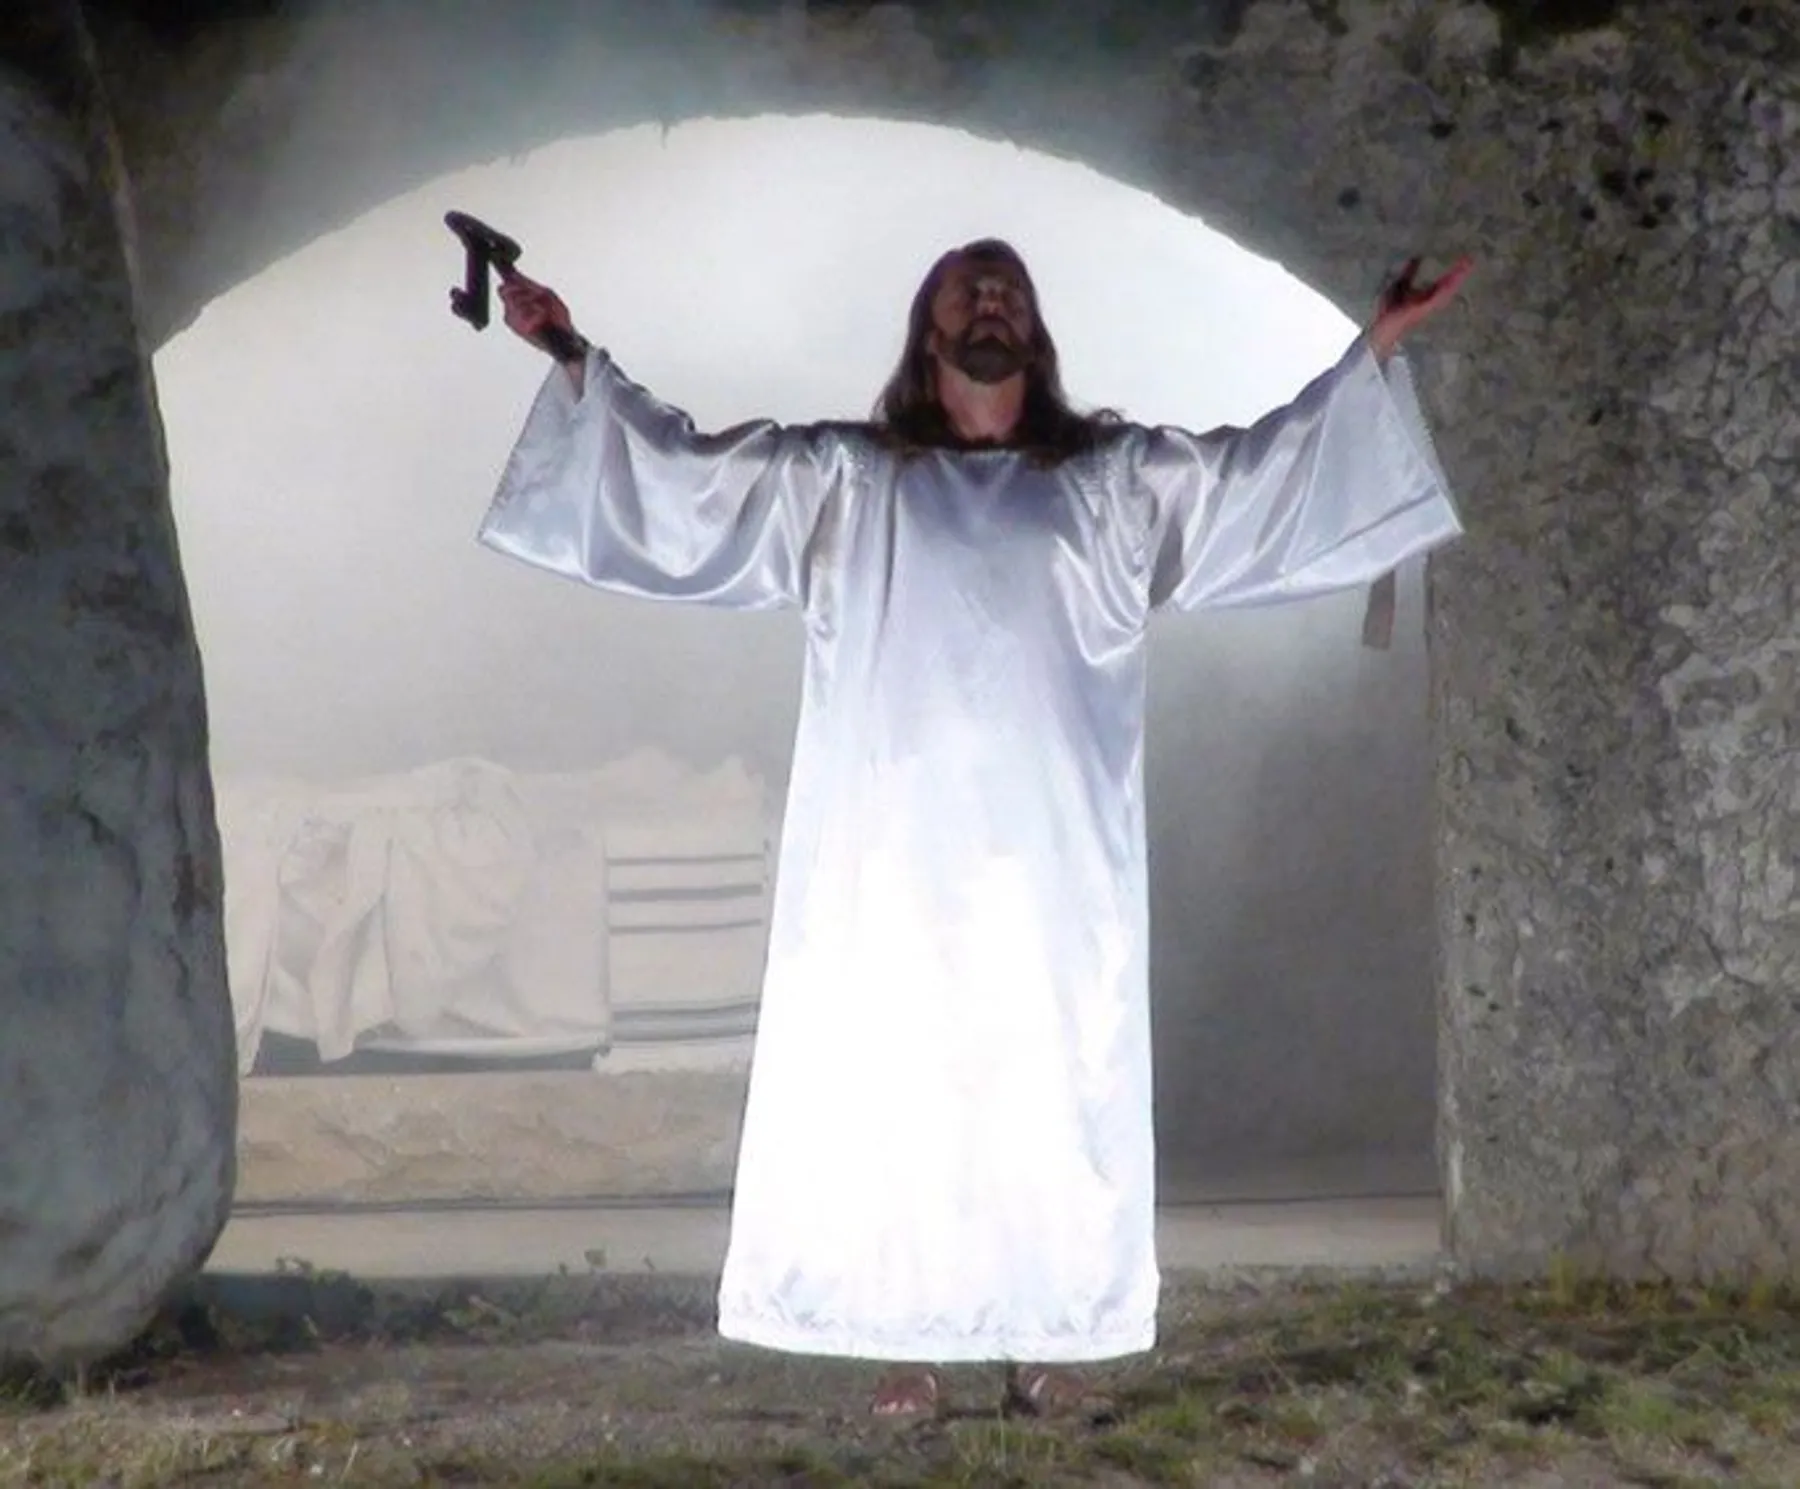 A person dressed in a white robe is standing with arms outstretched holding a small object in one hand, framed by an arched stone entryway, with a foggy backdrop.